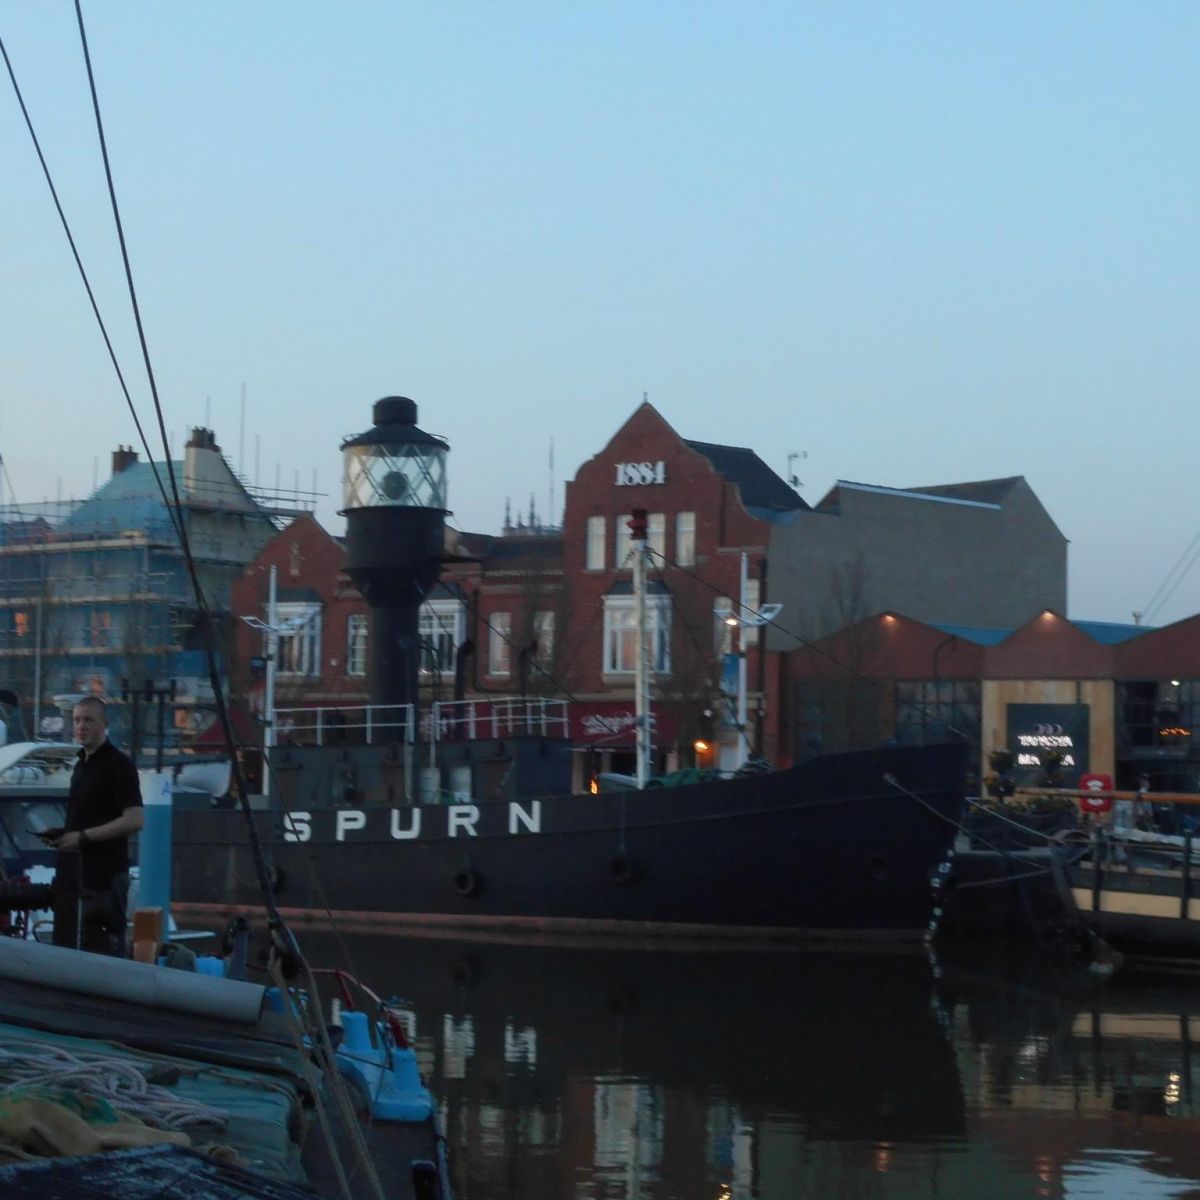 A view of the Spurn Lightship on Hull Marina